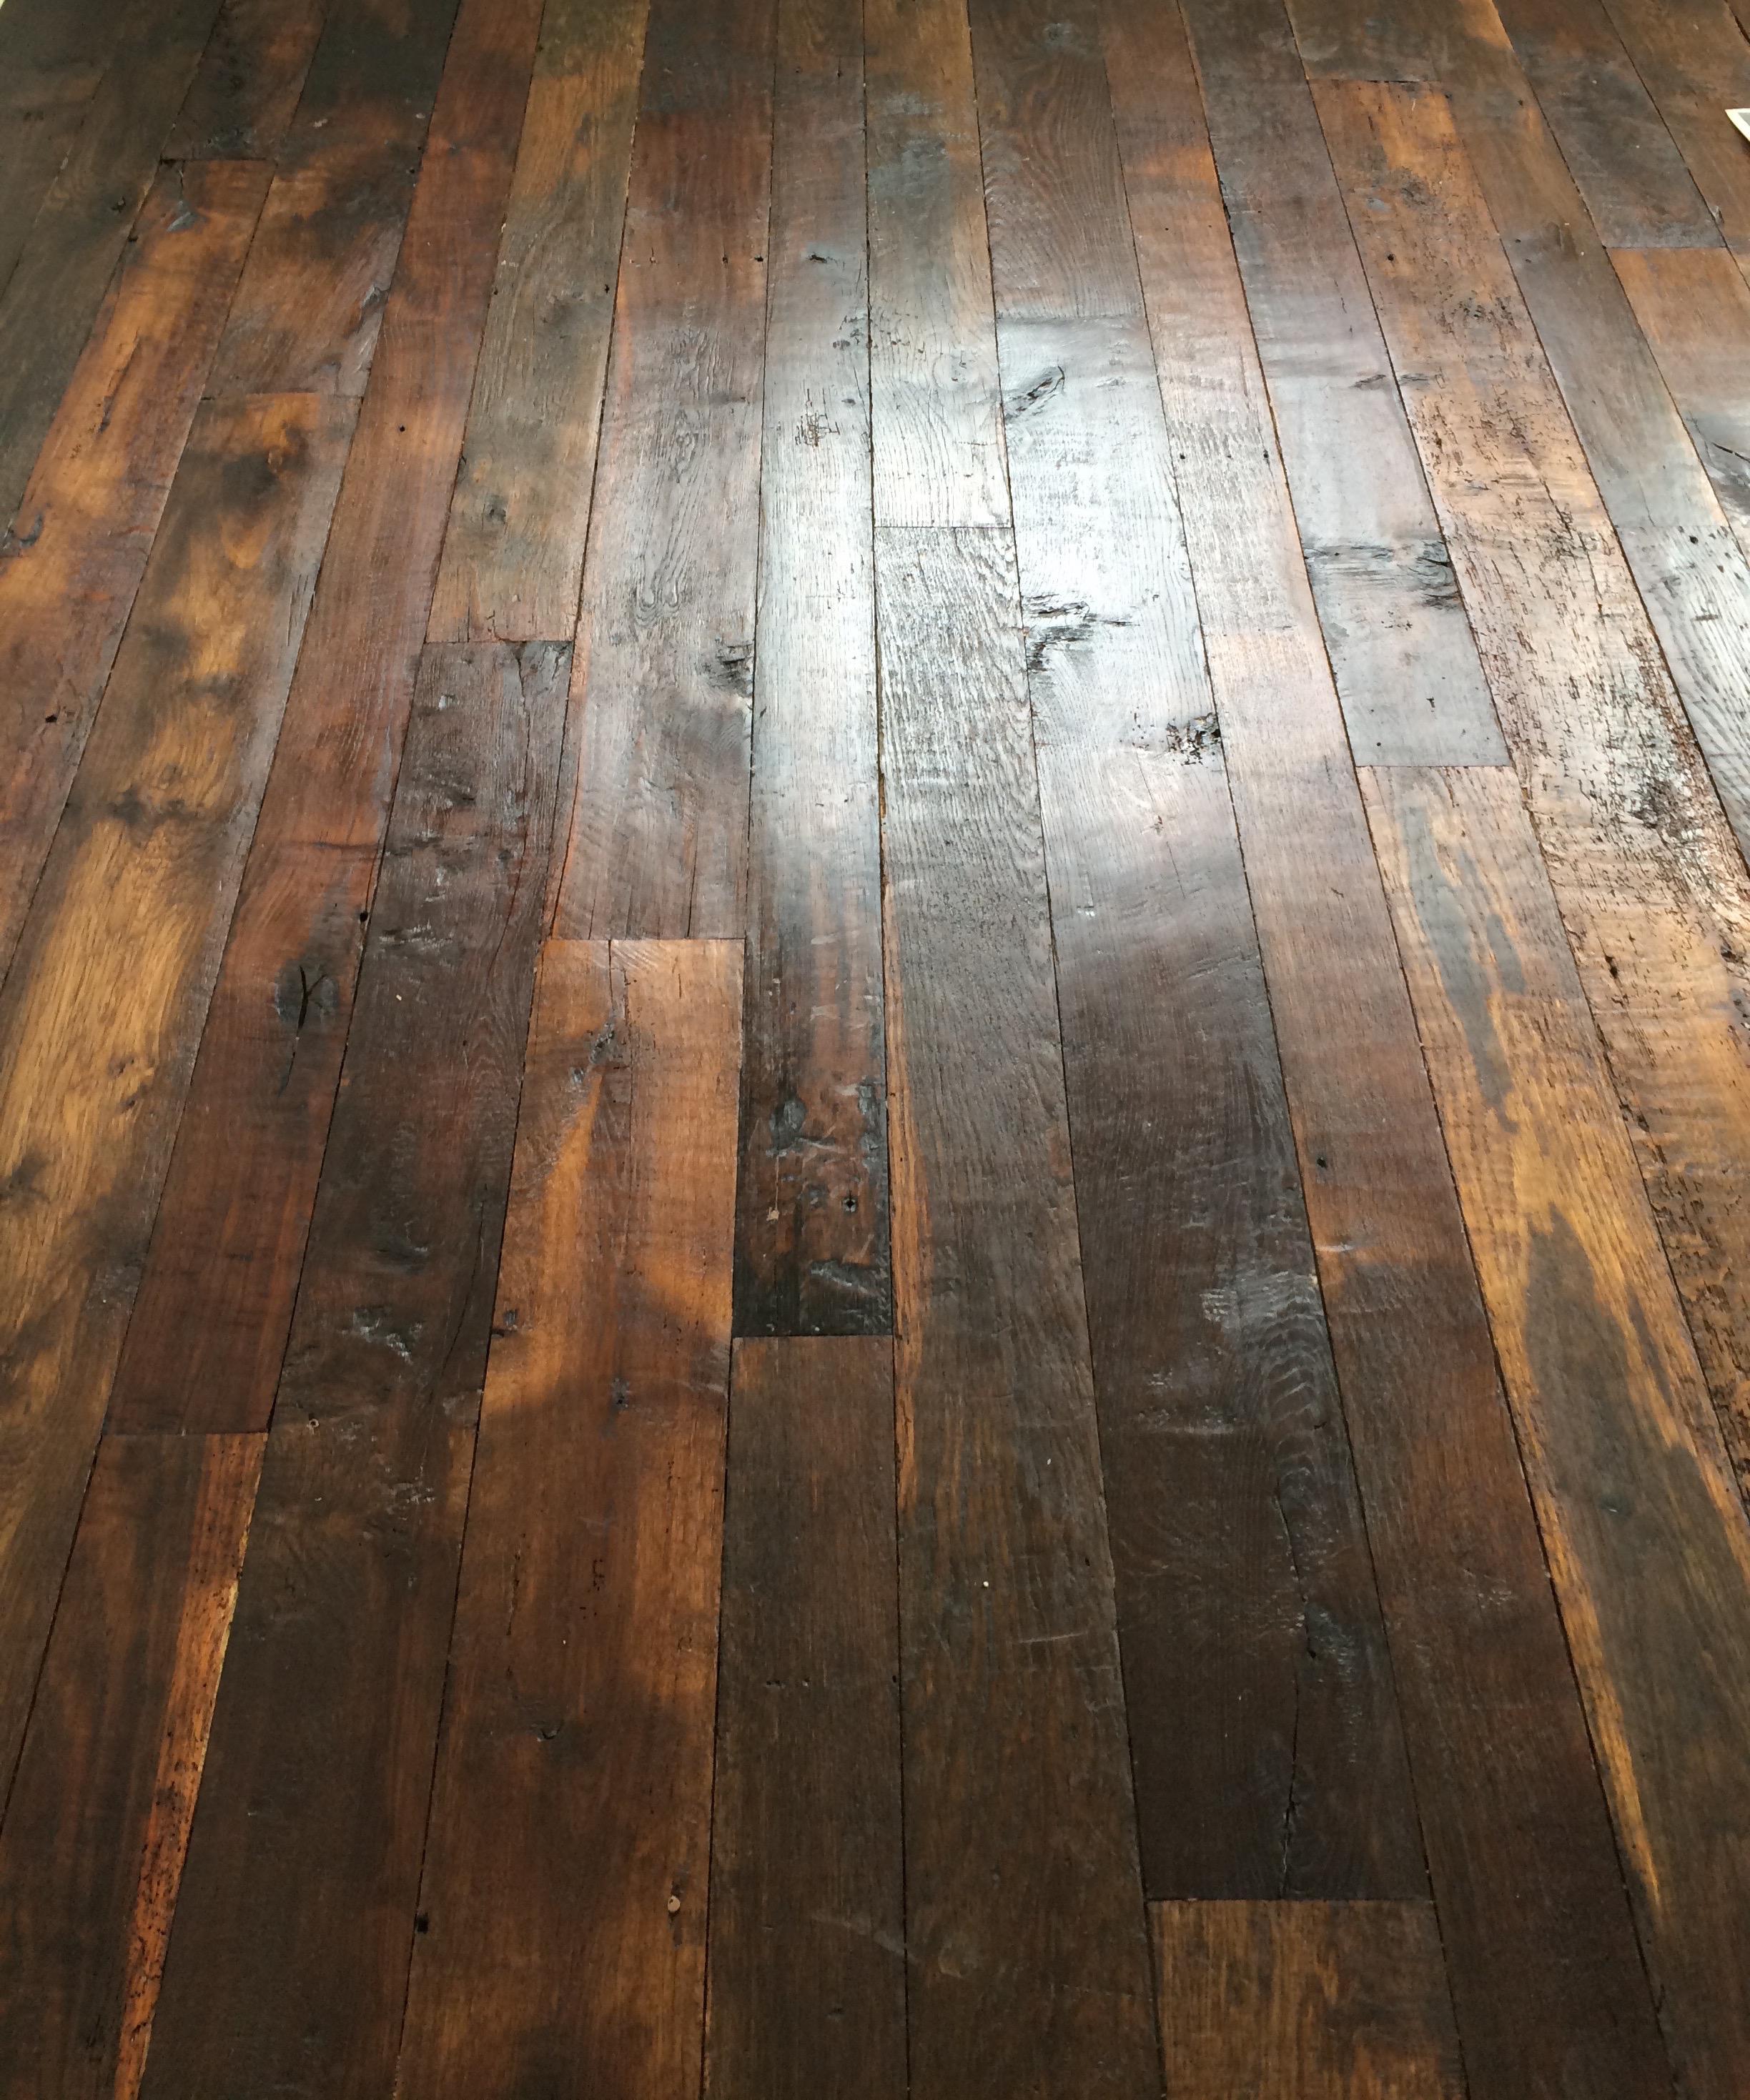 French Antique Solid Wood Oak Herringbone Pattern, France, 18th Century For Sale 2